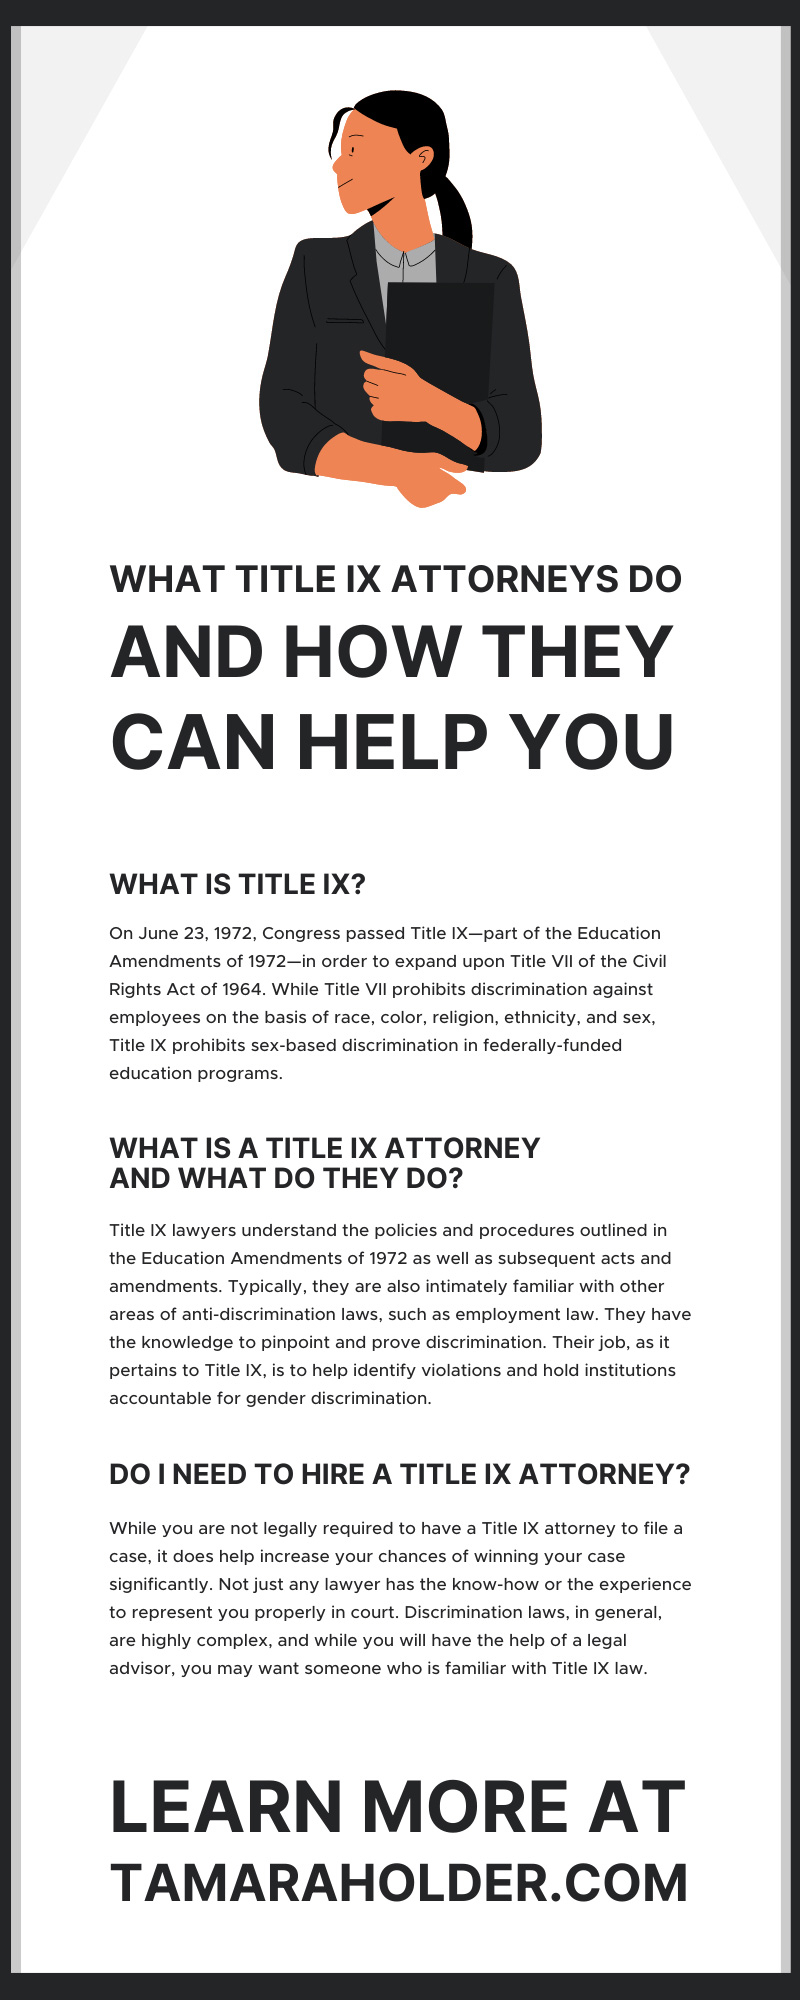 What Title IX Attorneys Do and How They Can Help You
